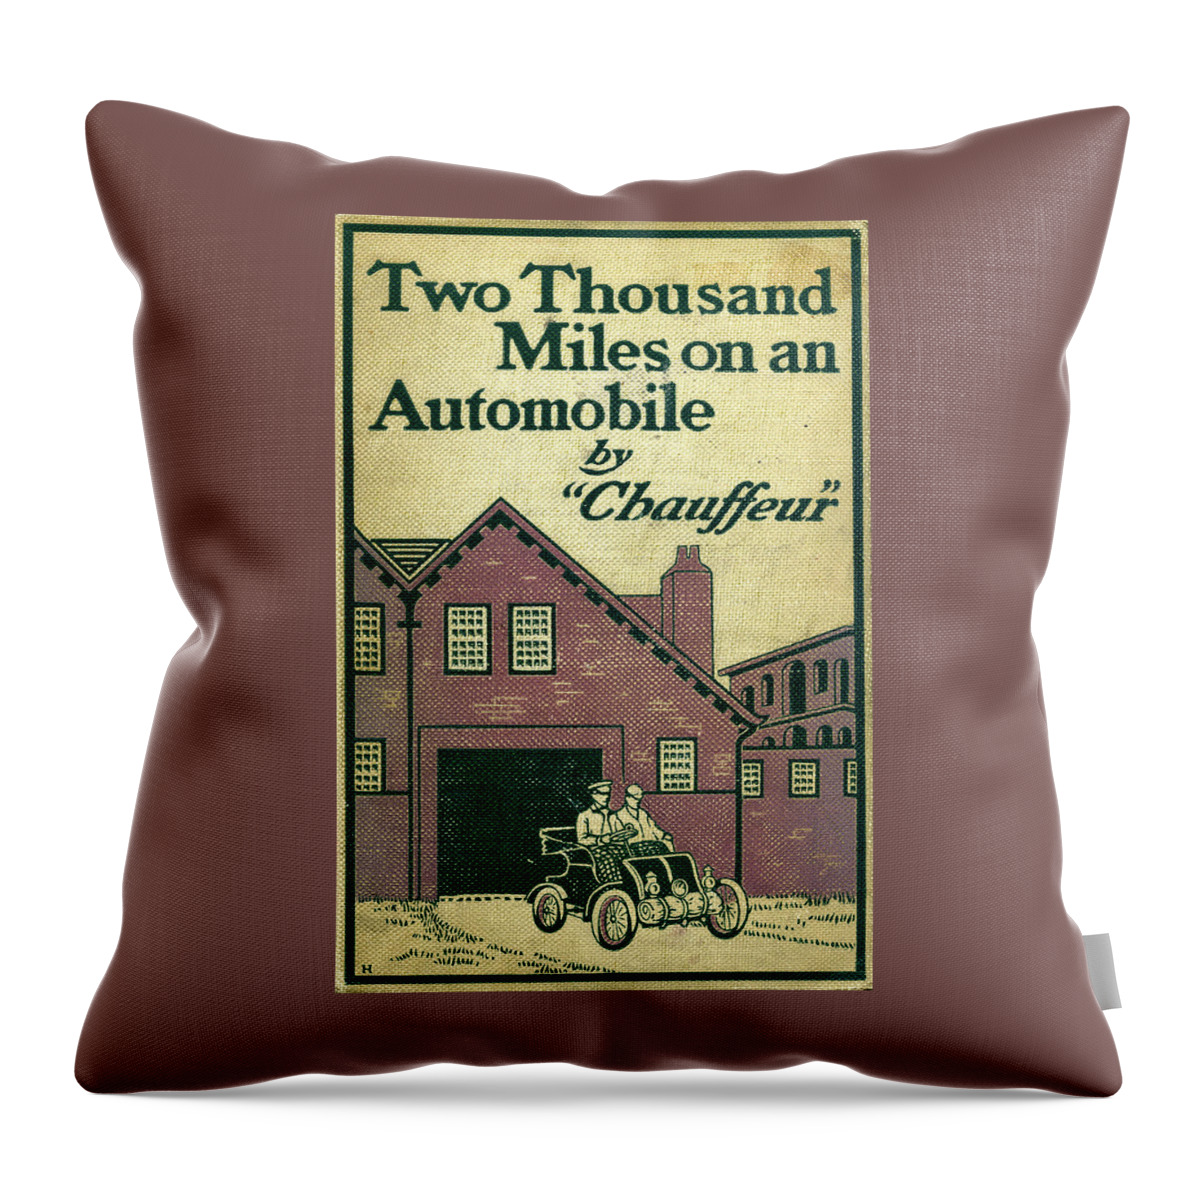 Automobile Throw Pillow featuring the mixed media Cover design for Two Thousand Miles on an Automobile by Edward Stratton Holloway